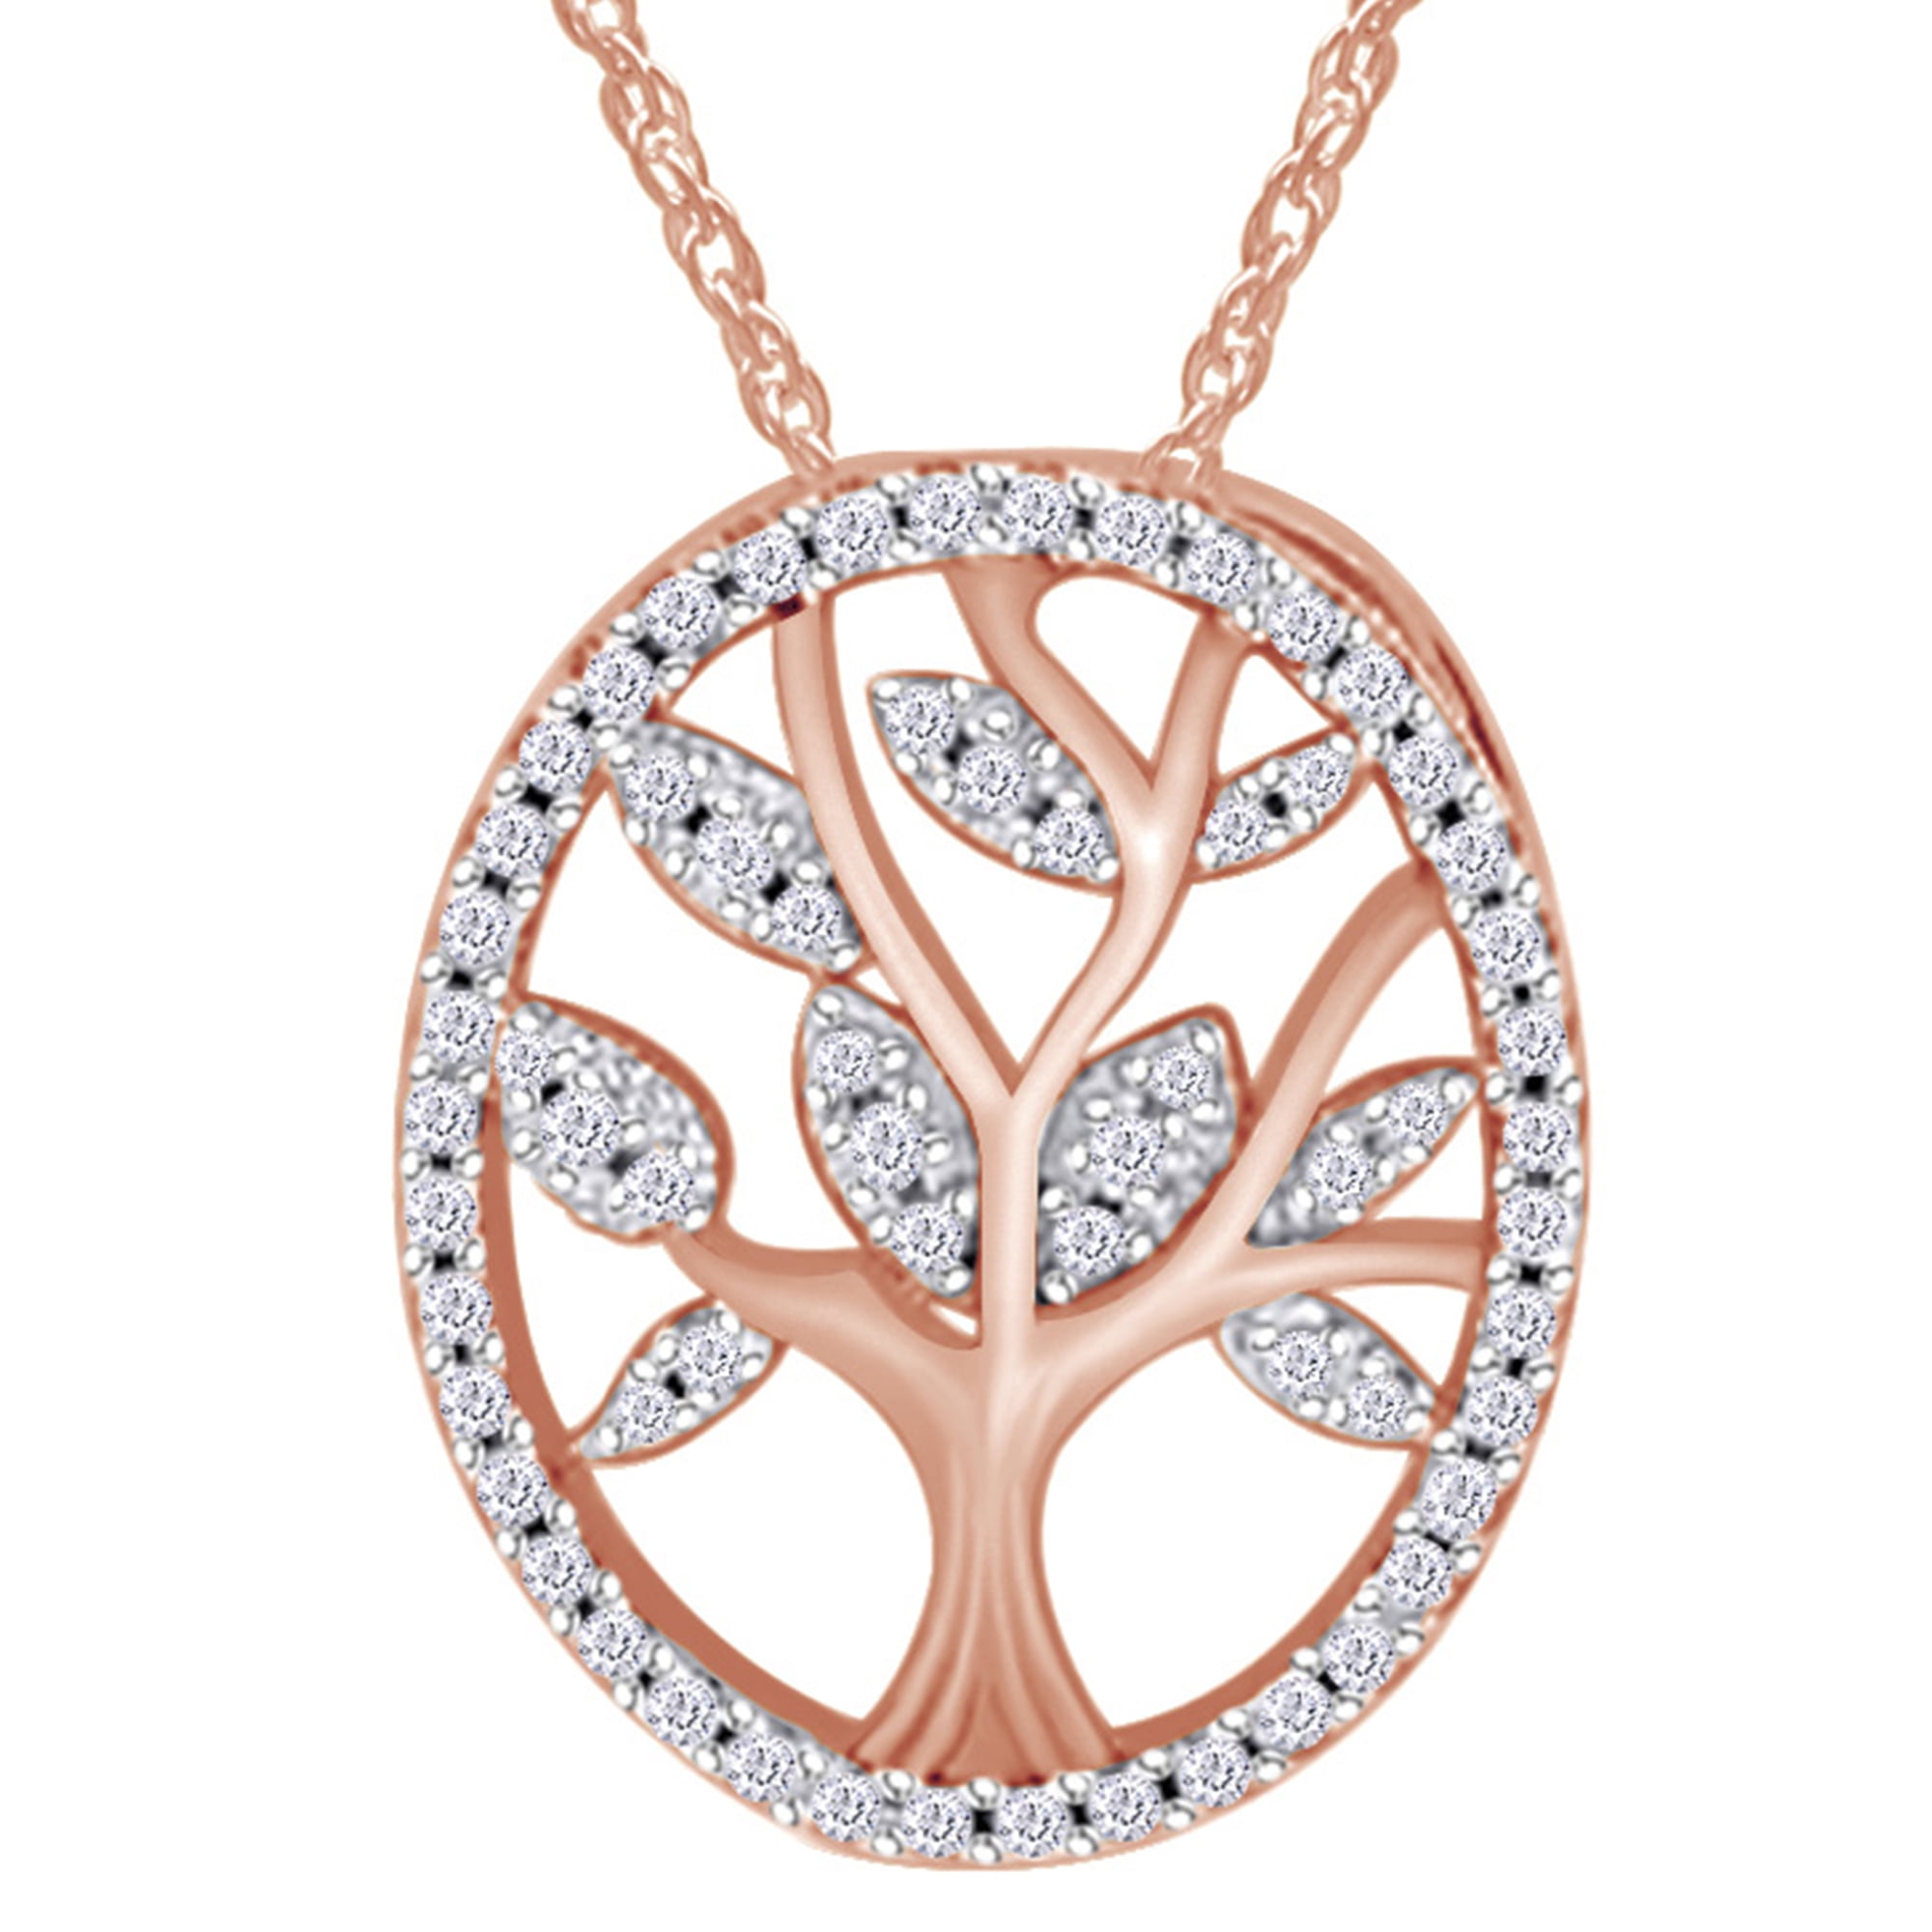 Wishrocks Round White Cubic Zirconia Circle of Life Pendant Necklace in Sterling Silver